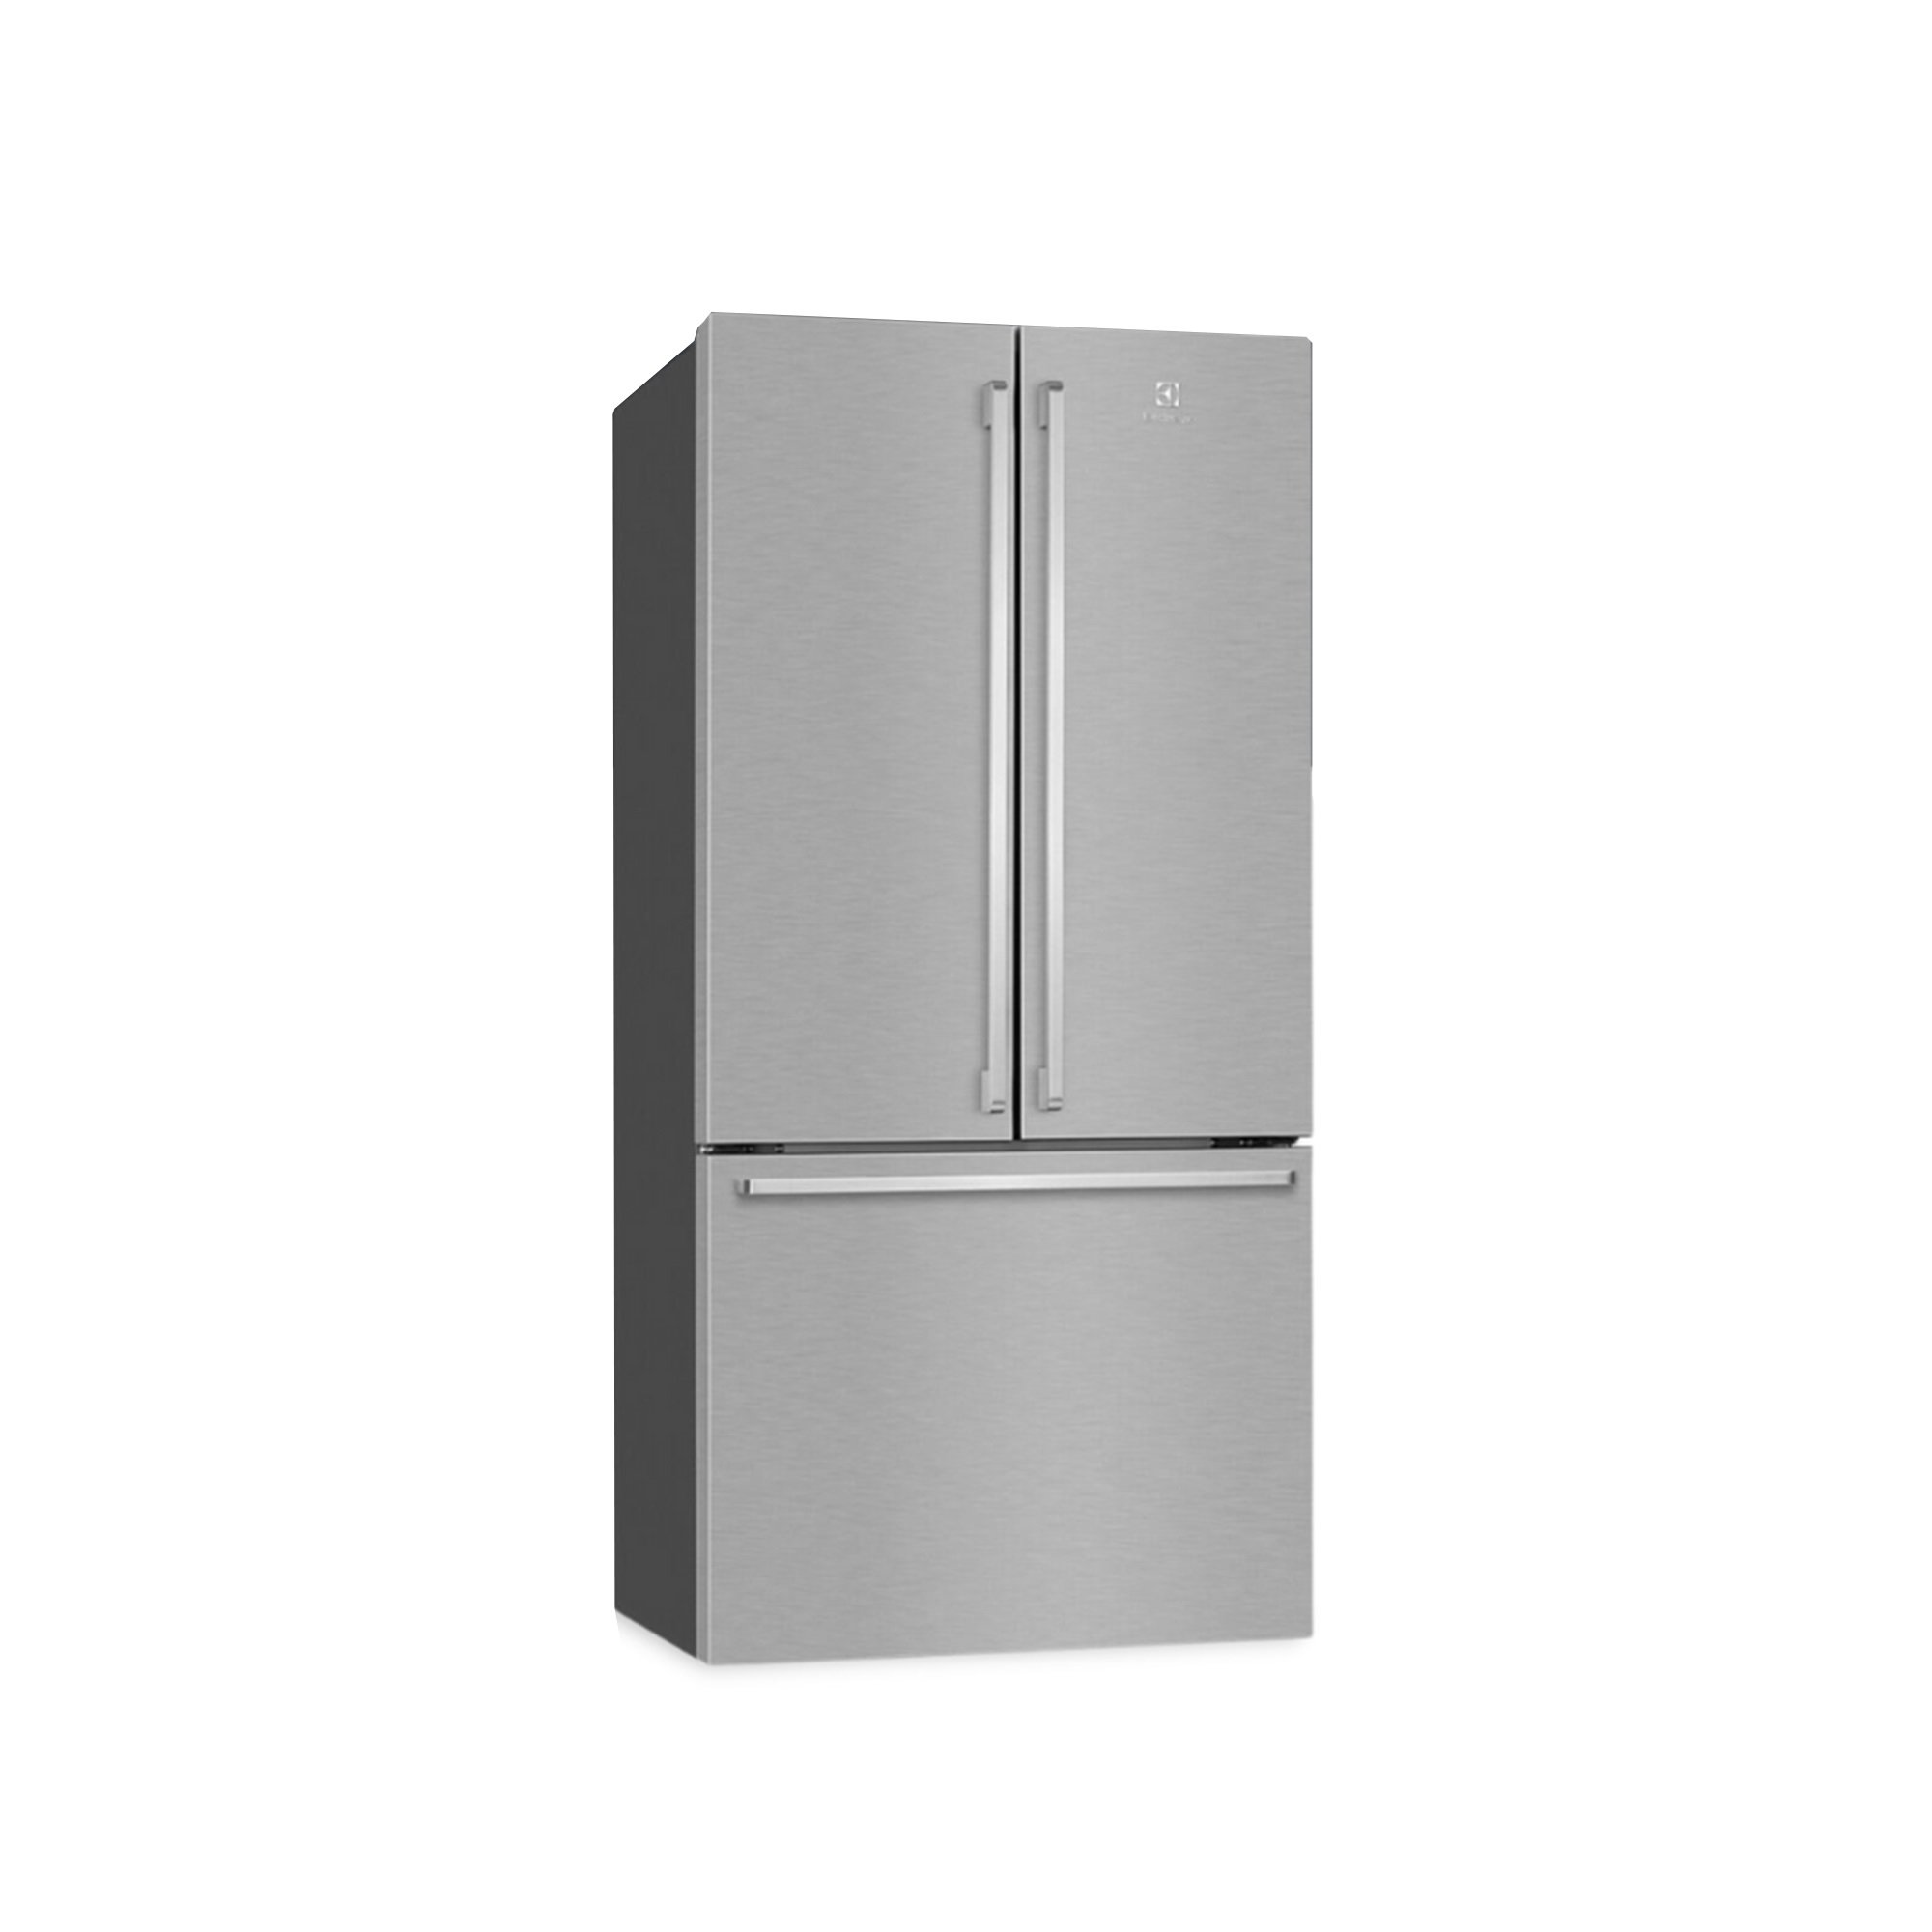 Electrolux No Frost French Door Inverter Refrigerator